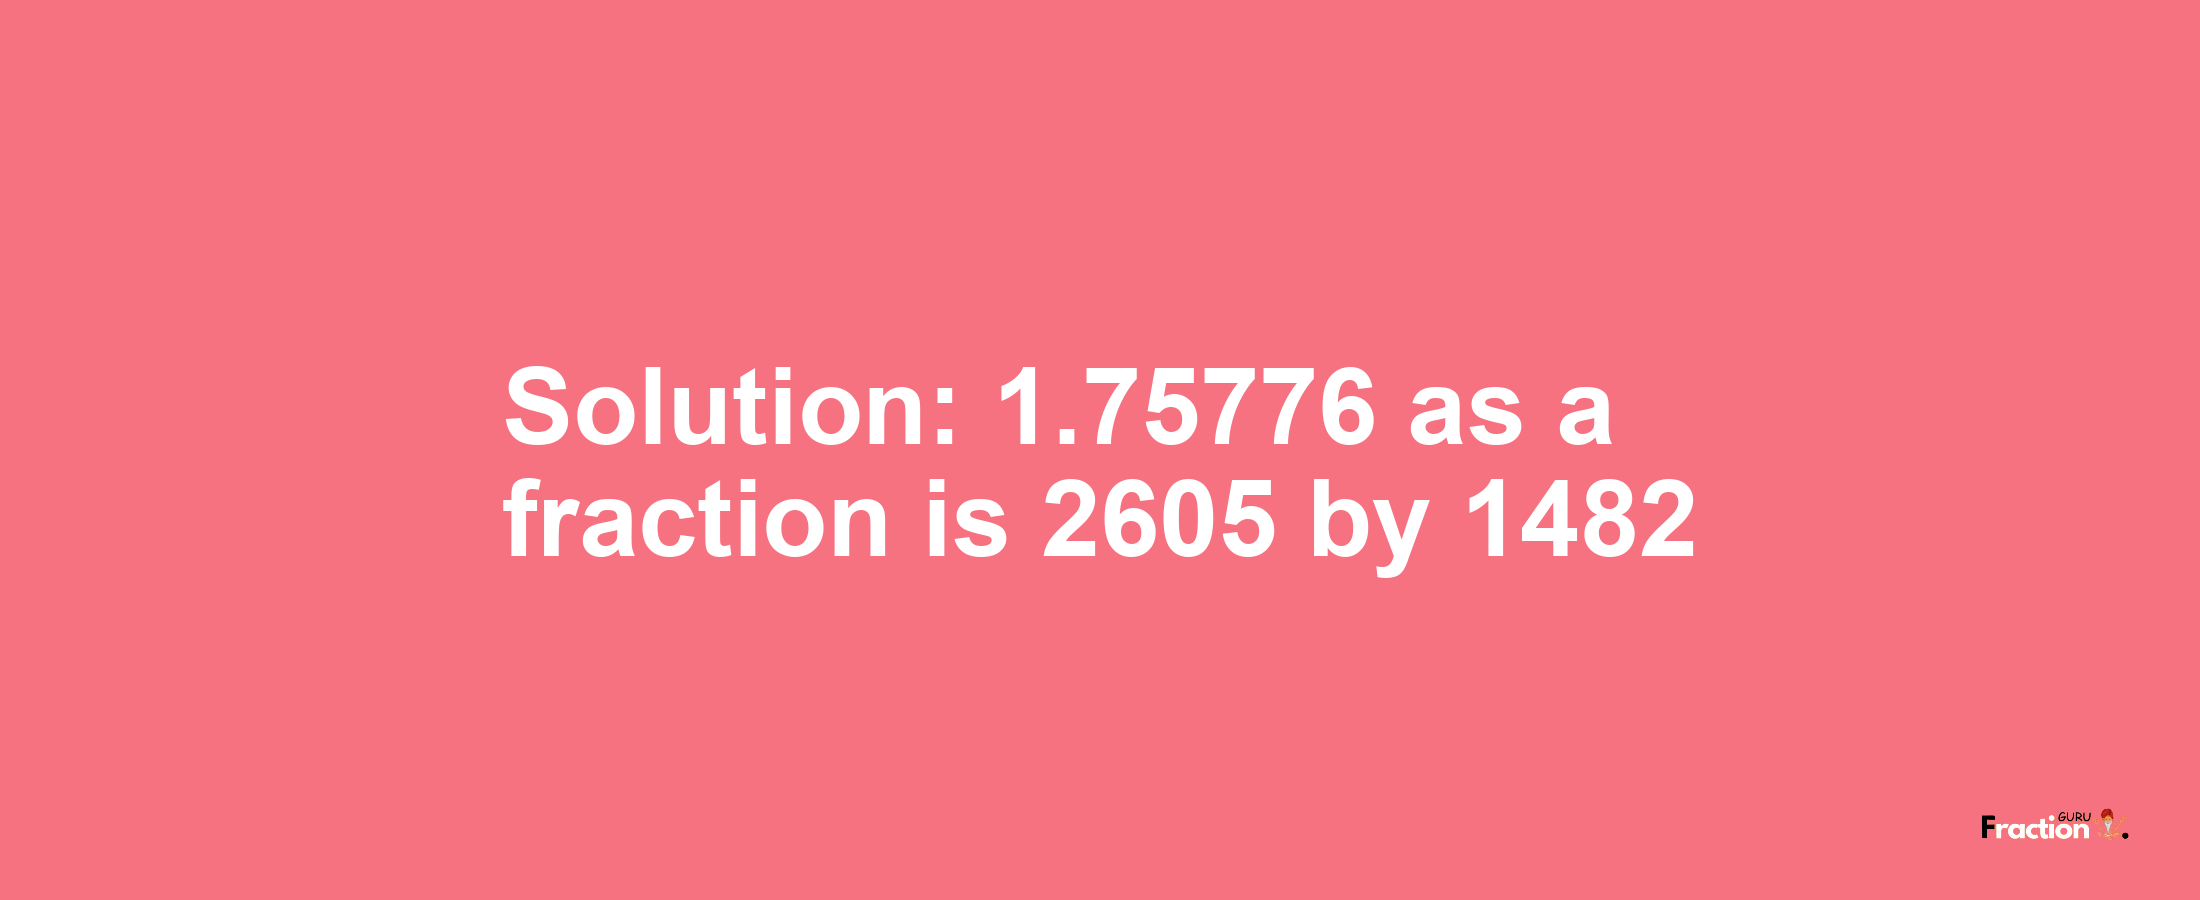 Solution:1.75776 as a fraction is 2605/1482